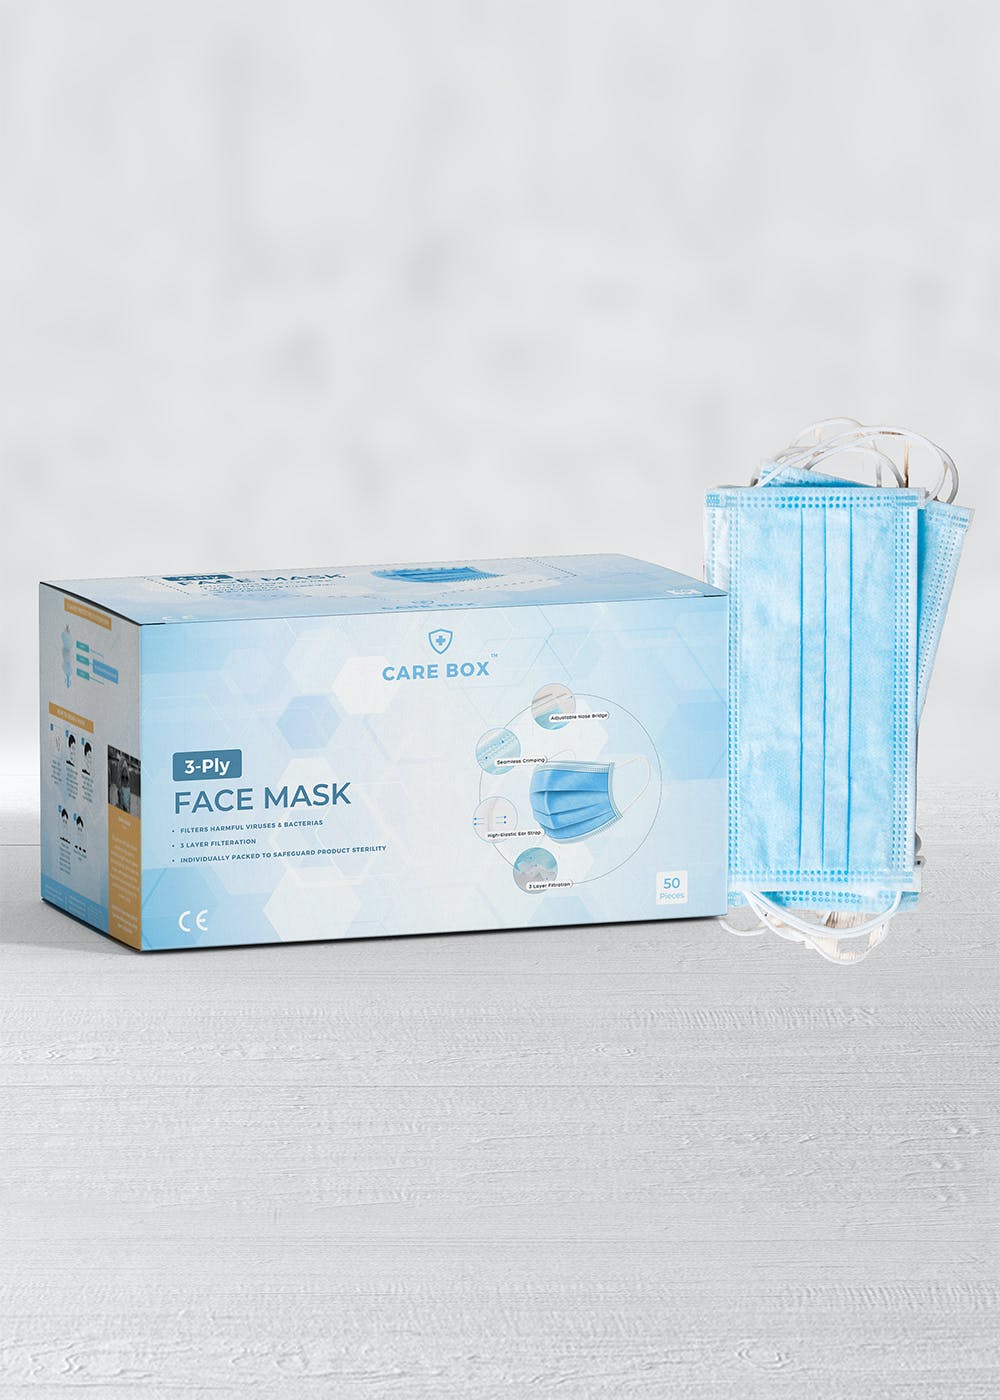 3-Ply Face Mask